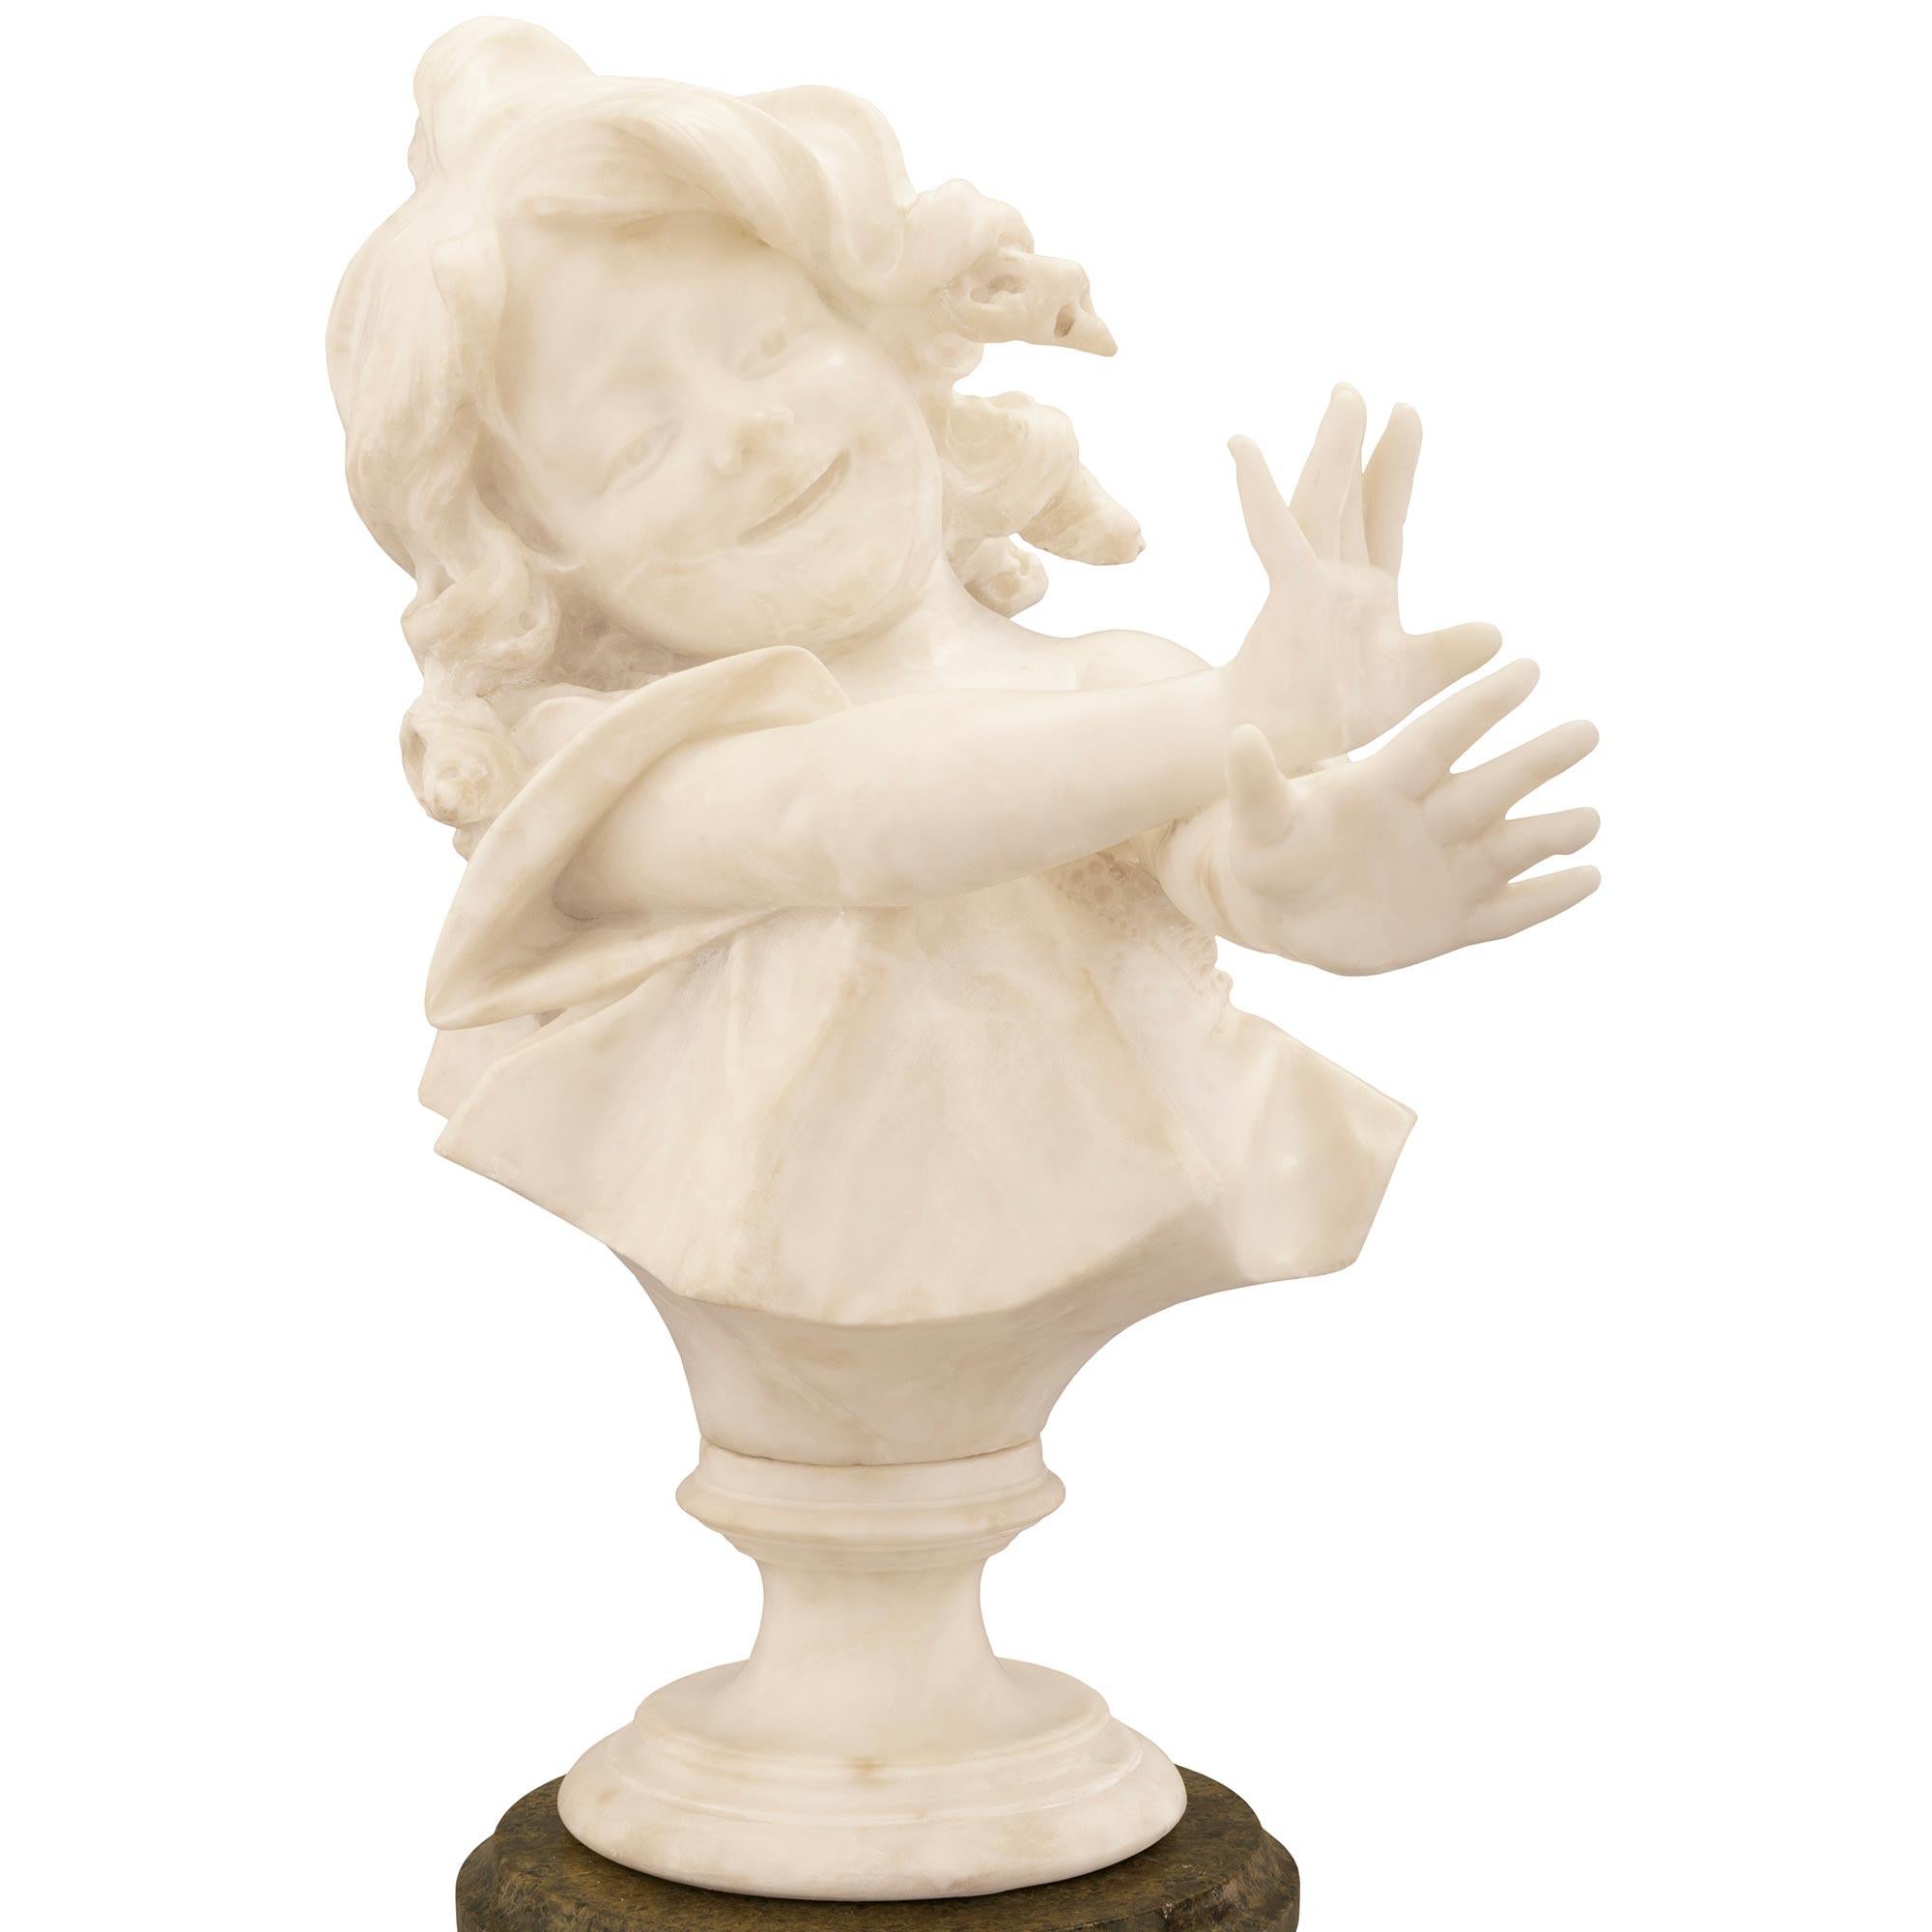 A stunning and most charming Italian 19th century white Carrara marble statue of a young girl on its original Vert de Patricia marble pedestal. The delicately carved statue depicts a young girl smiling with her hands extended in front of her in a